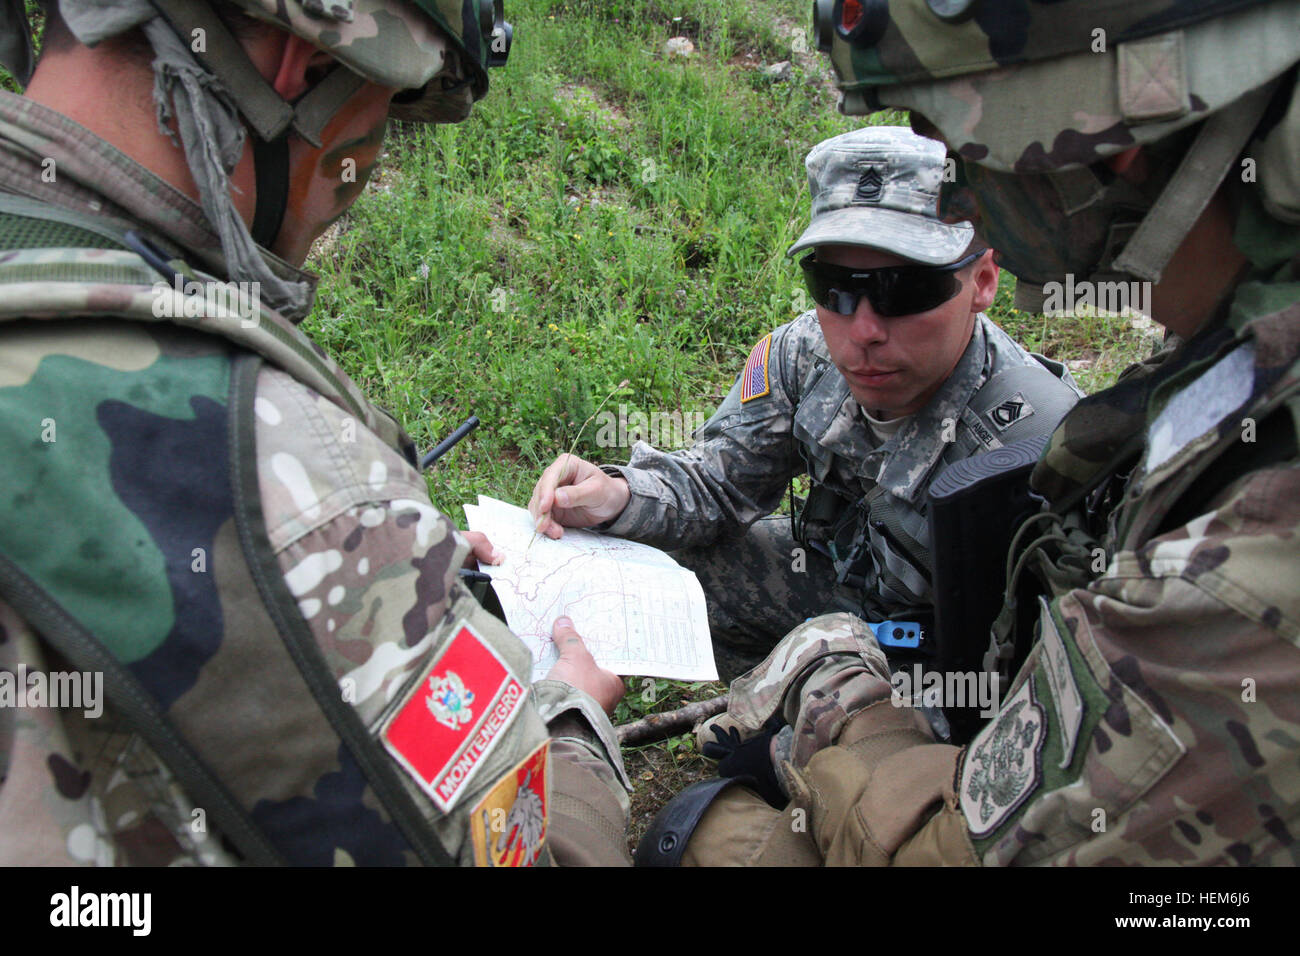 U.S. Army Europe's SFC Randy Angel, one of the observer controllers with the Joint Multi-national Training Command out of Hohenfels, Germany from St. Louis, MO uses a map to give guidance to members of the Montenegrin Army as they conduct an ambush exercise during the Immediate Response 2012 (IR12) training event held in Slunj, Croatia on Friday, June 1, 2012.  IR12 is a multinational tactical field training exercise that will involve more than 700 personnel primarily from the U.S. Army Europeís 2nd Calvary Regiment and Croatian armed forces, with contingents from Albania, Bosnia-Herzegovina,  Stock Photo